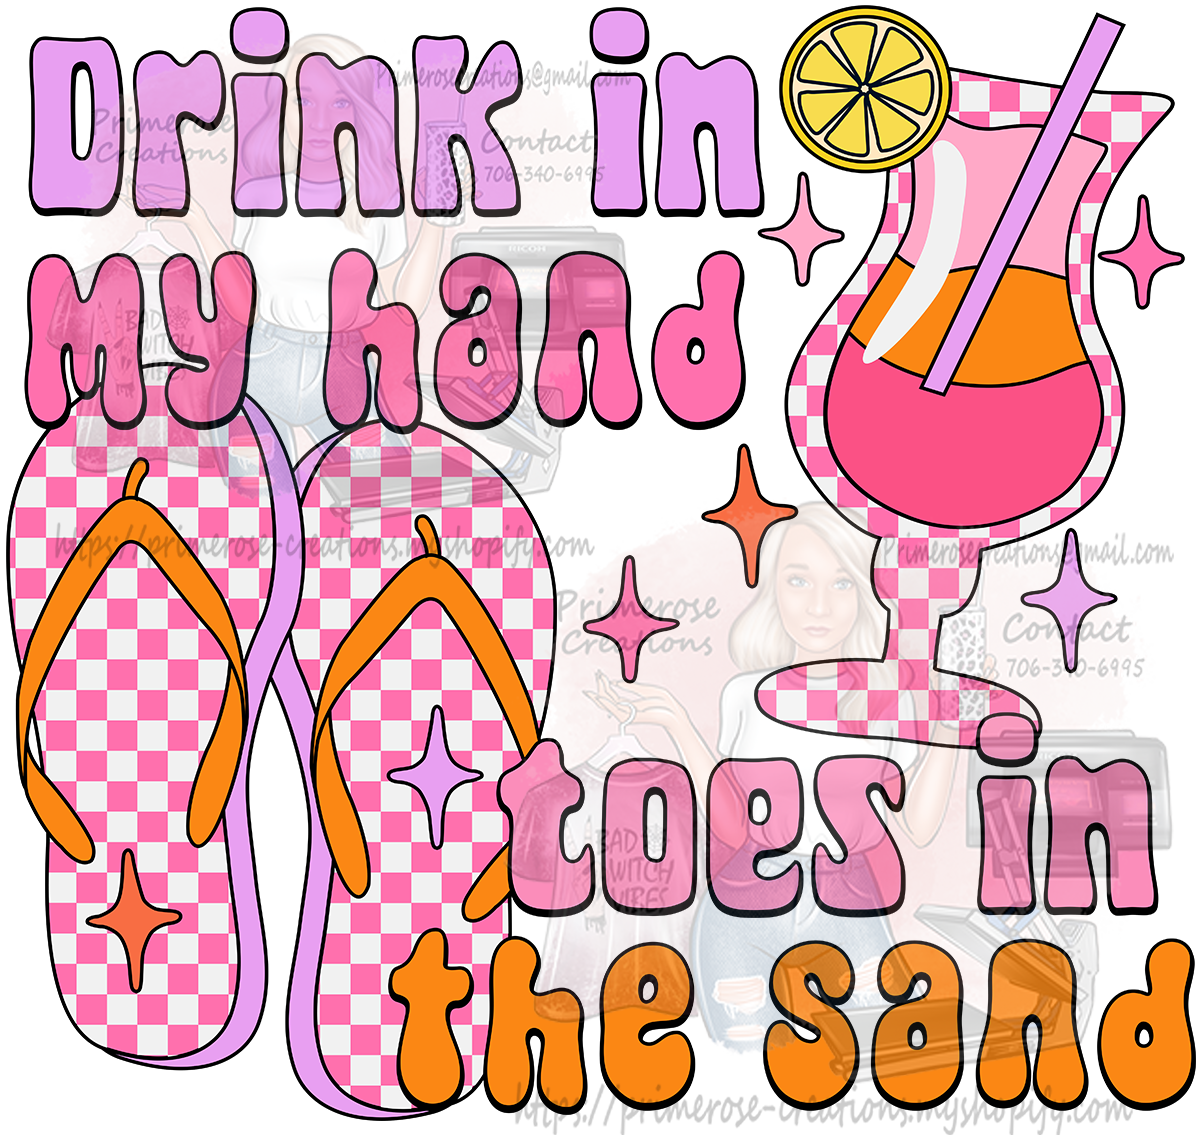 Drink In My Hand Toes In The Sand